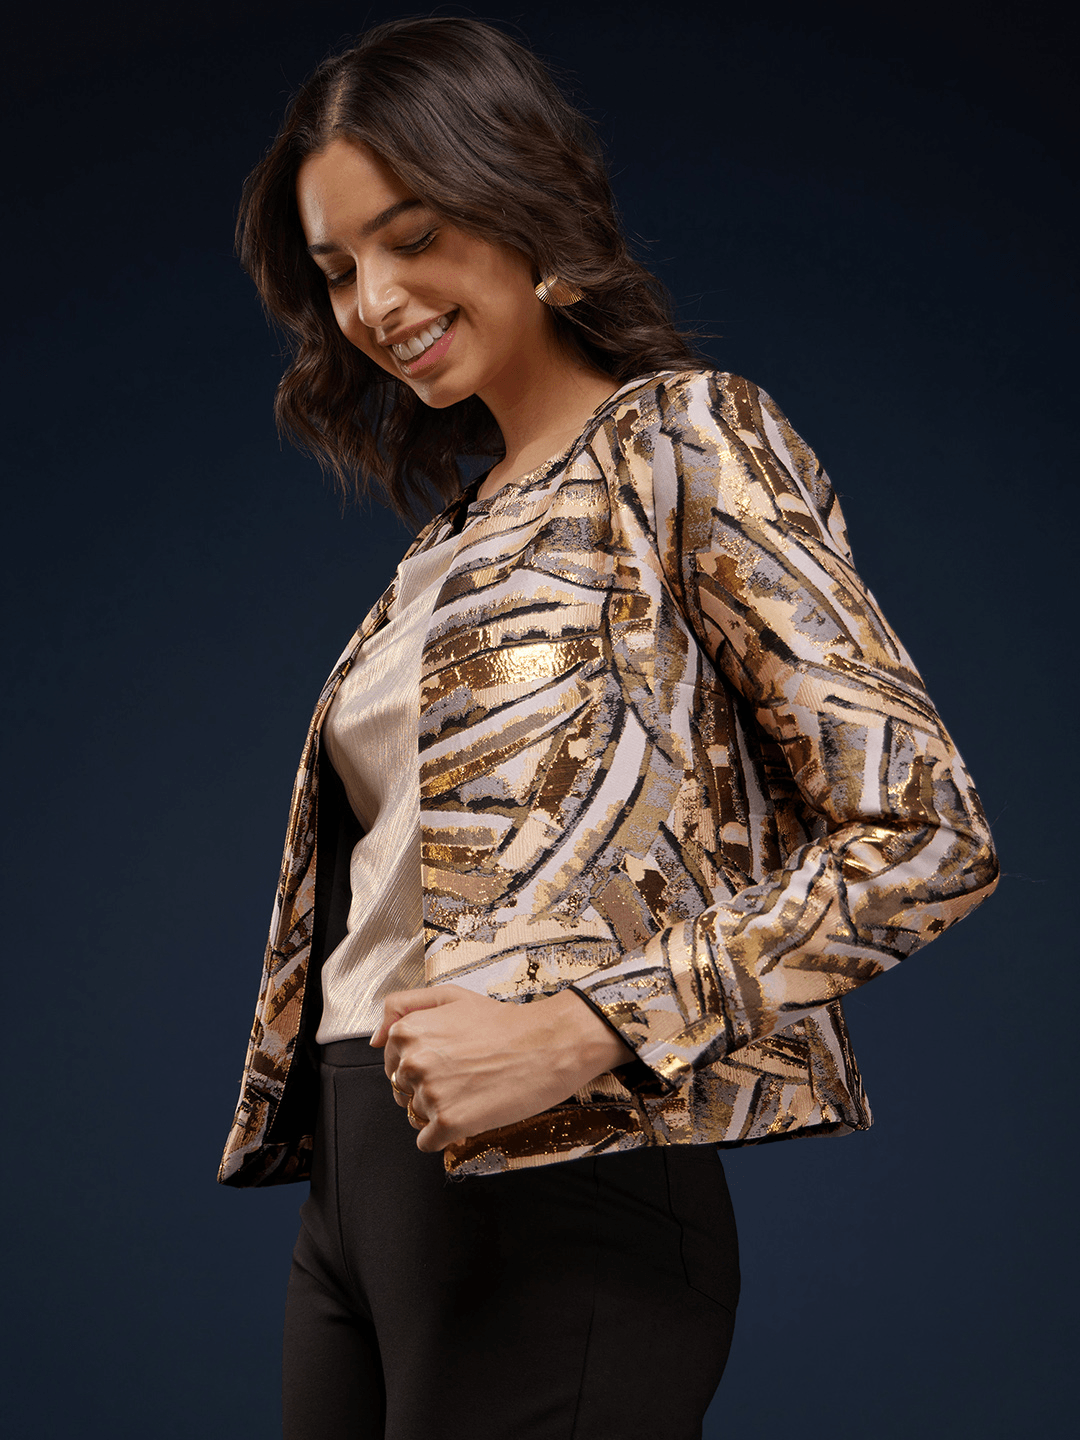 Jacquard Open Front Jacket - Beige And Gold